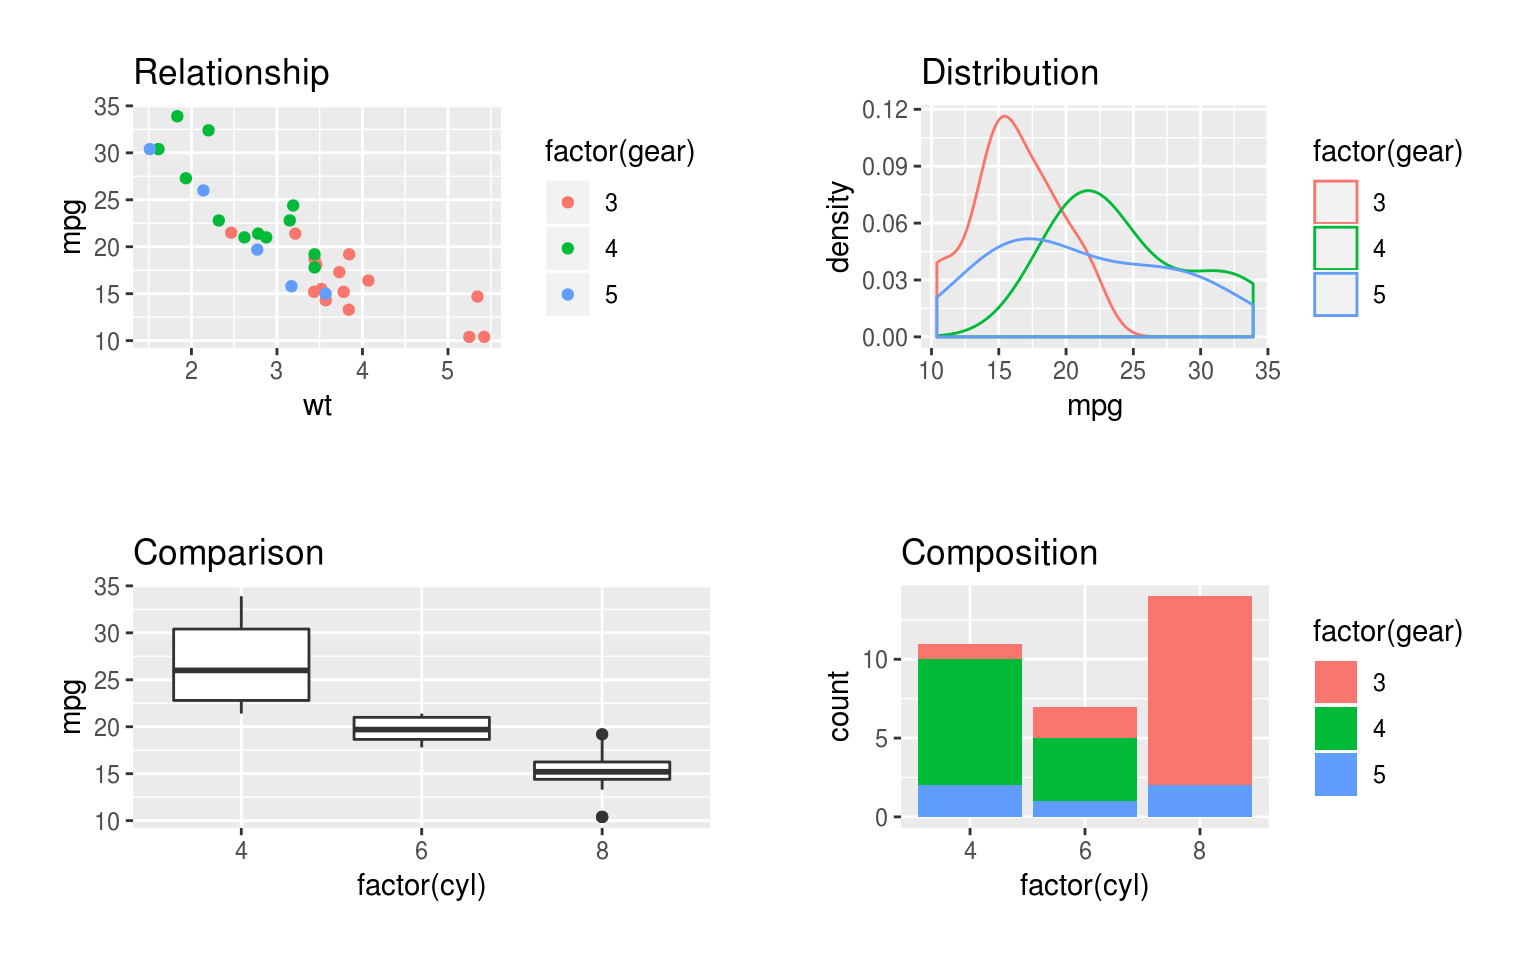 Examples of charts showing comaprisons, relationships, distribution and composition. The comparison, distribution and composition plots show 2 variables, but the relationship plot includes 3, increasing the density of the information displayed. 